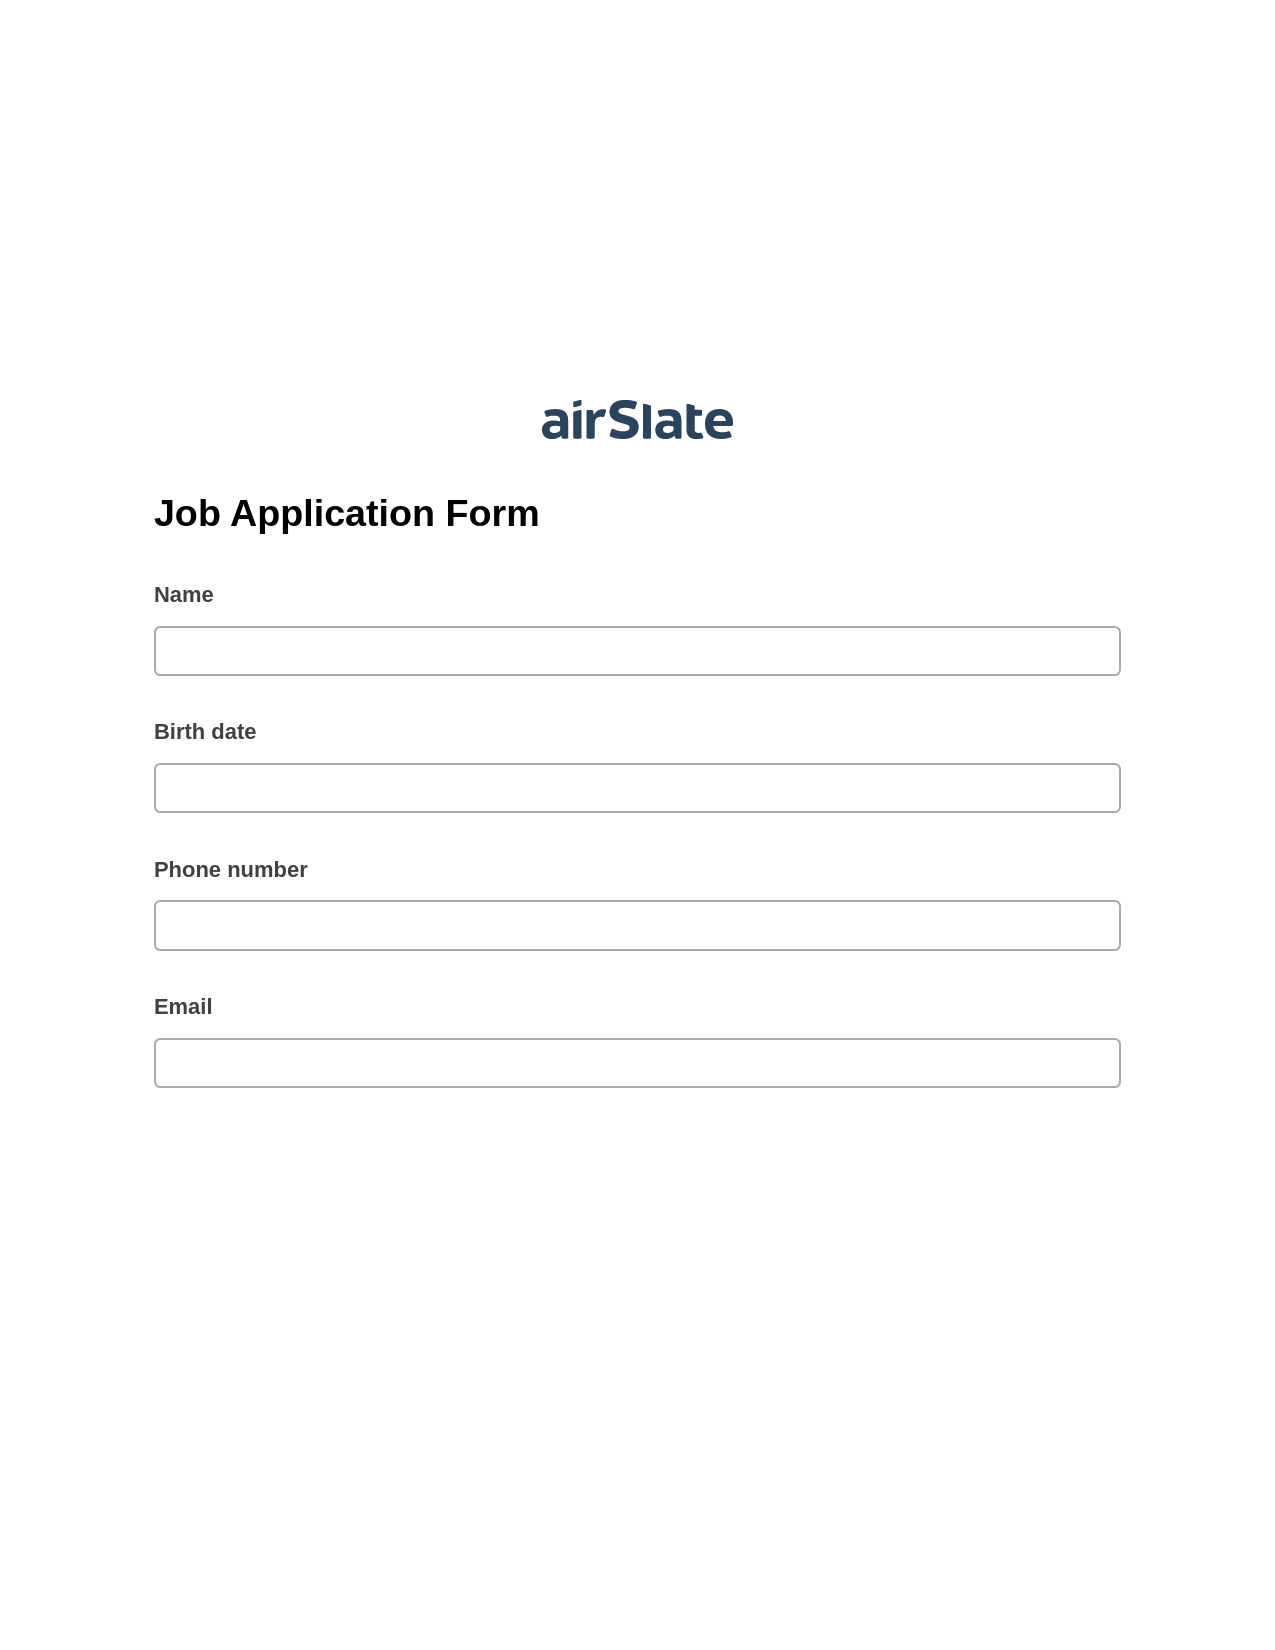 Multirole Job Application Form Pre-fill Dropdown from Airtable, Remove Slate Bot, Box Bot